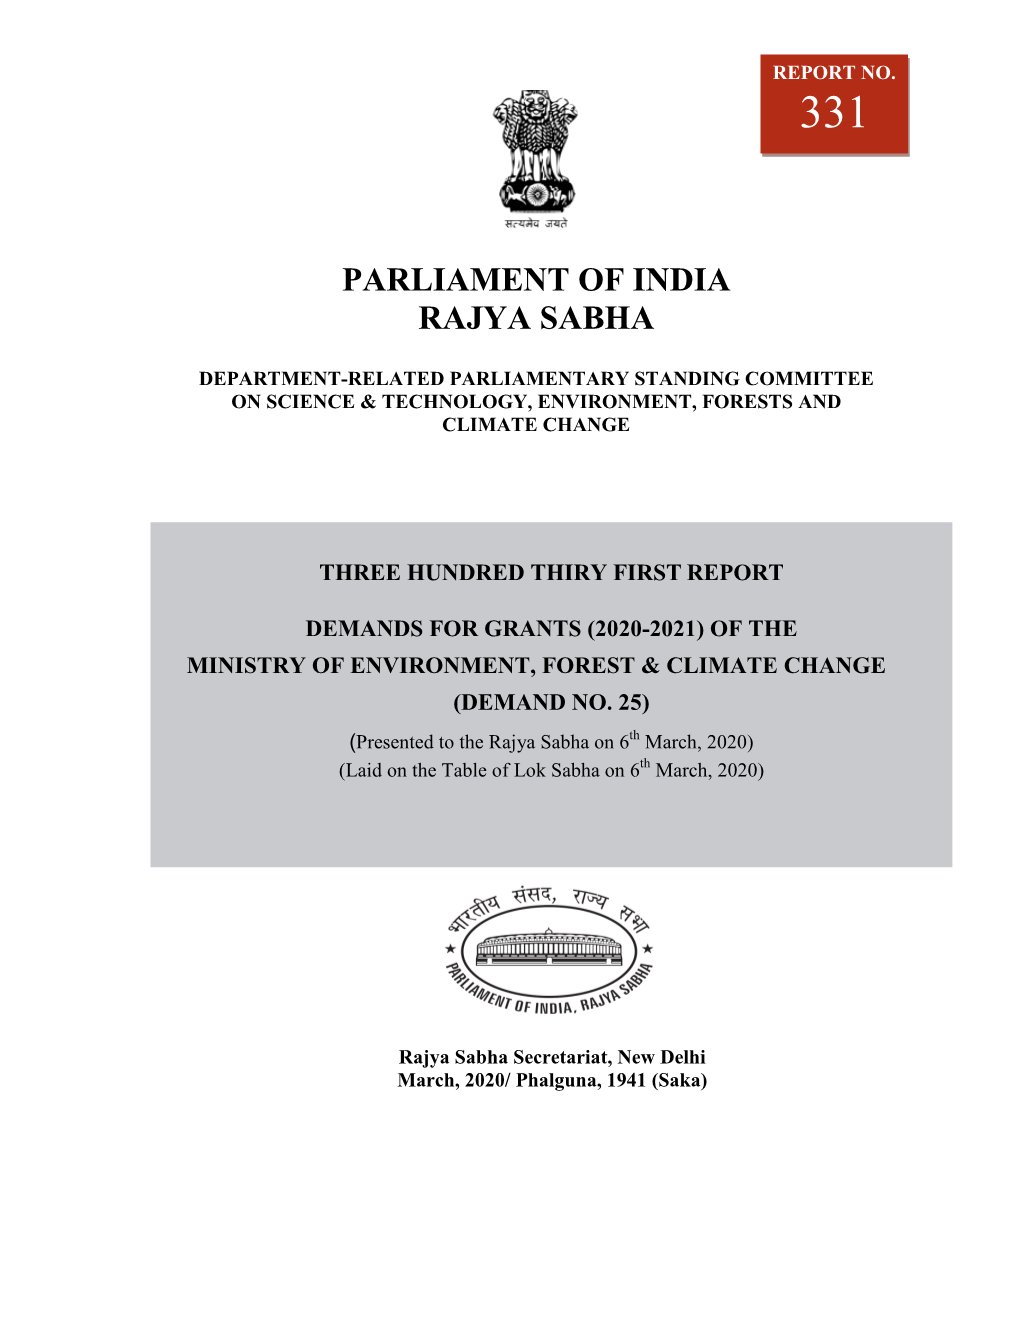 Parliament of India Rajya Sabha Department-Related Parliamentary Standing Committee on Science & Technology, Environment, Forests and Climate Change